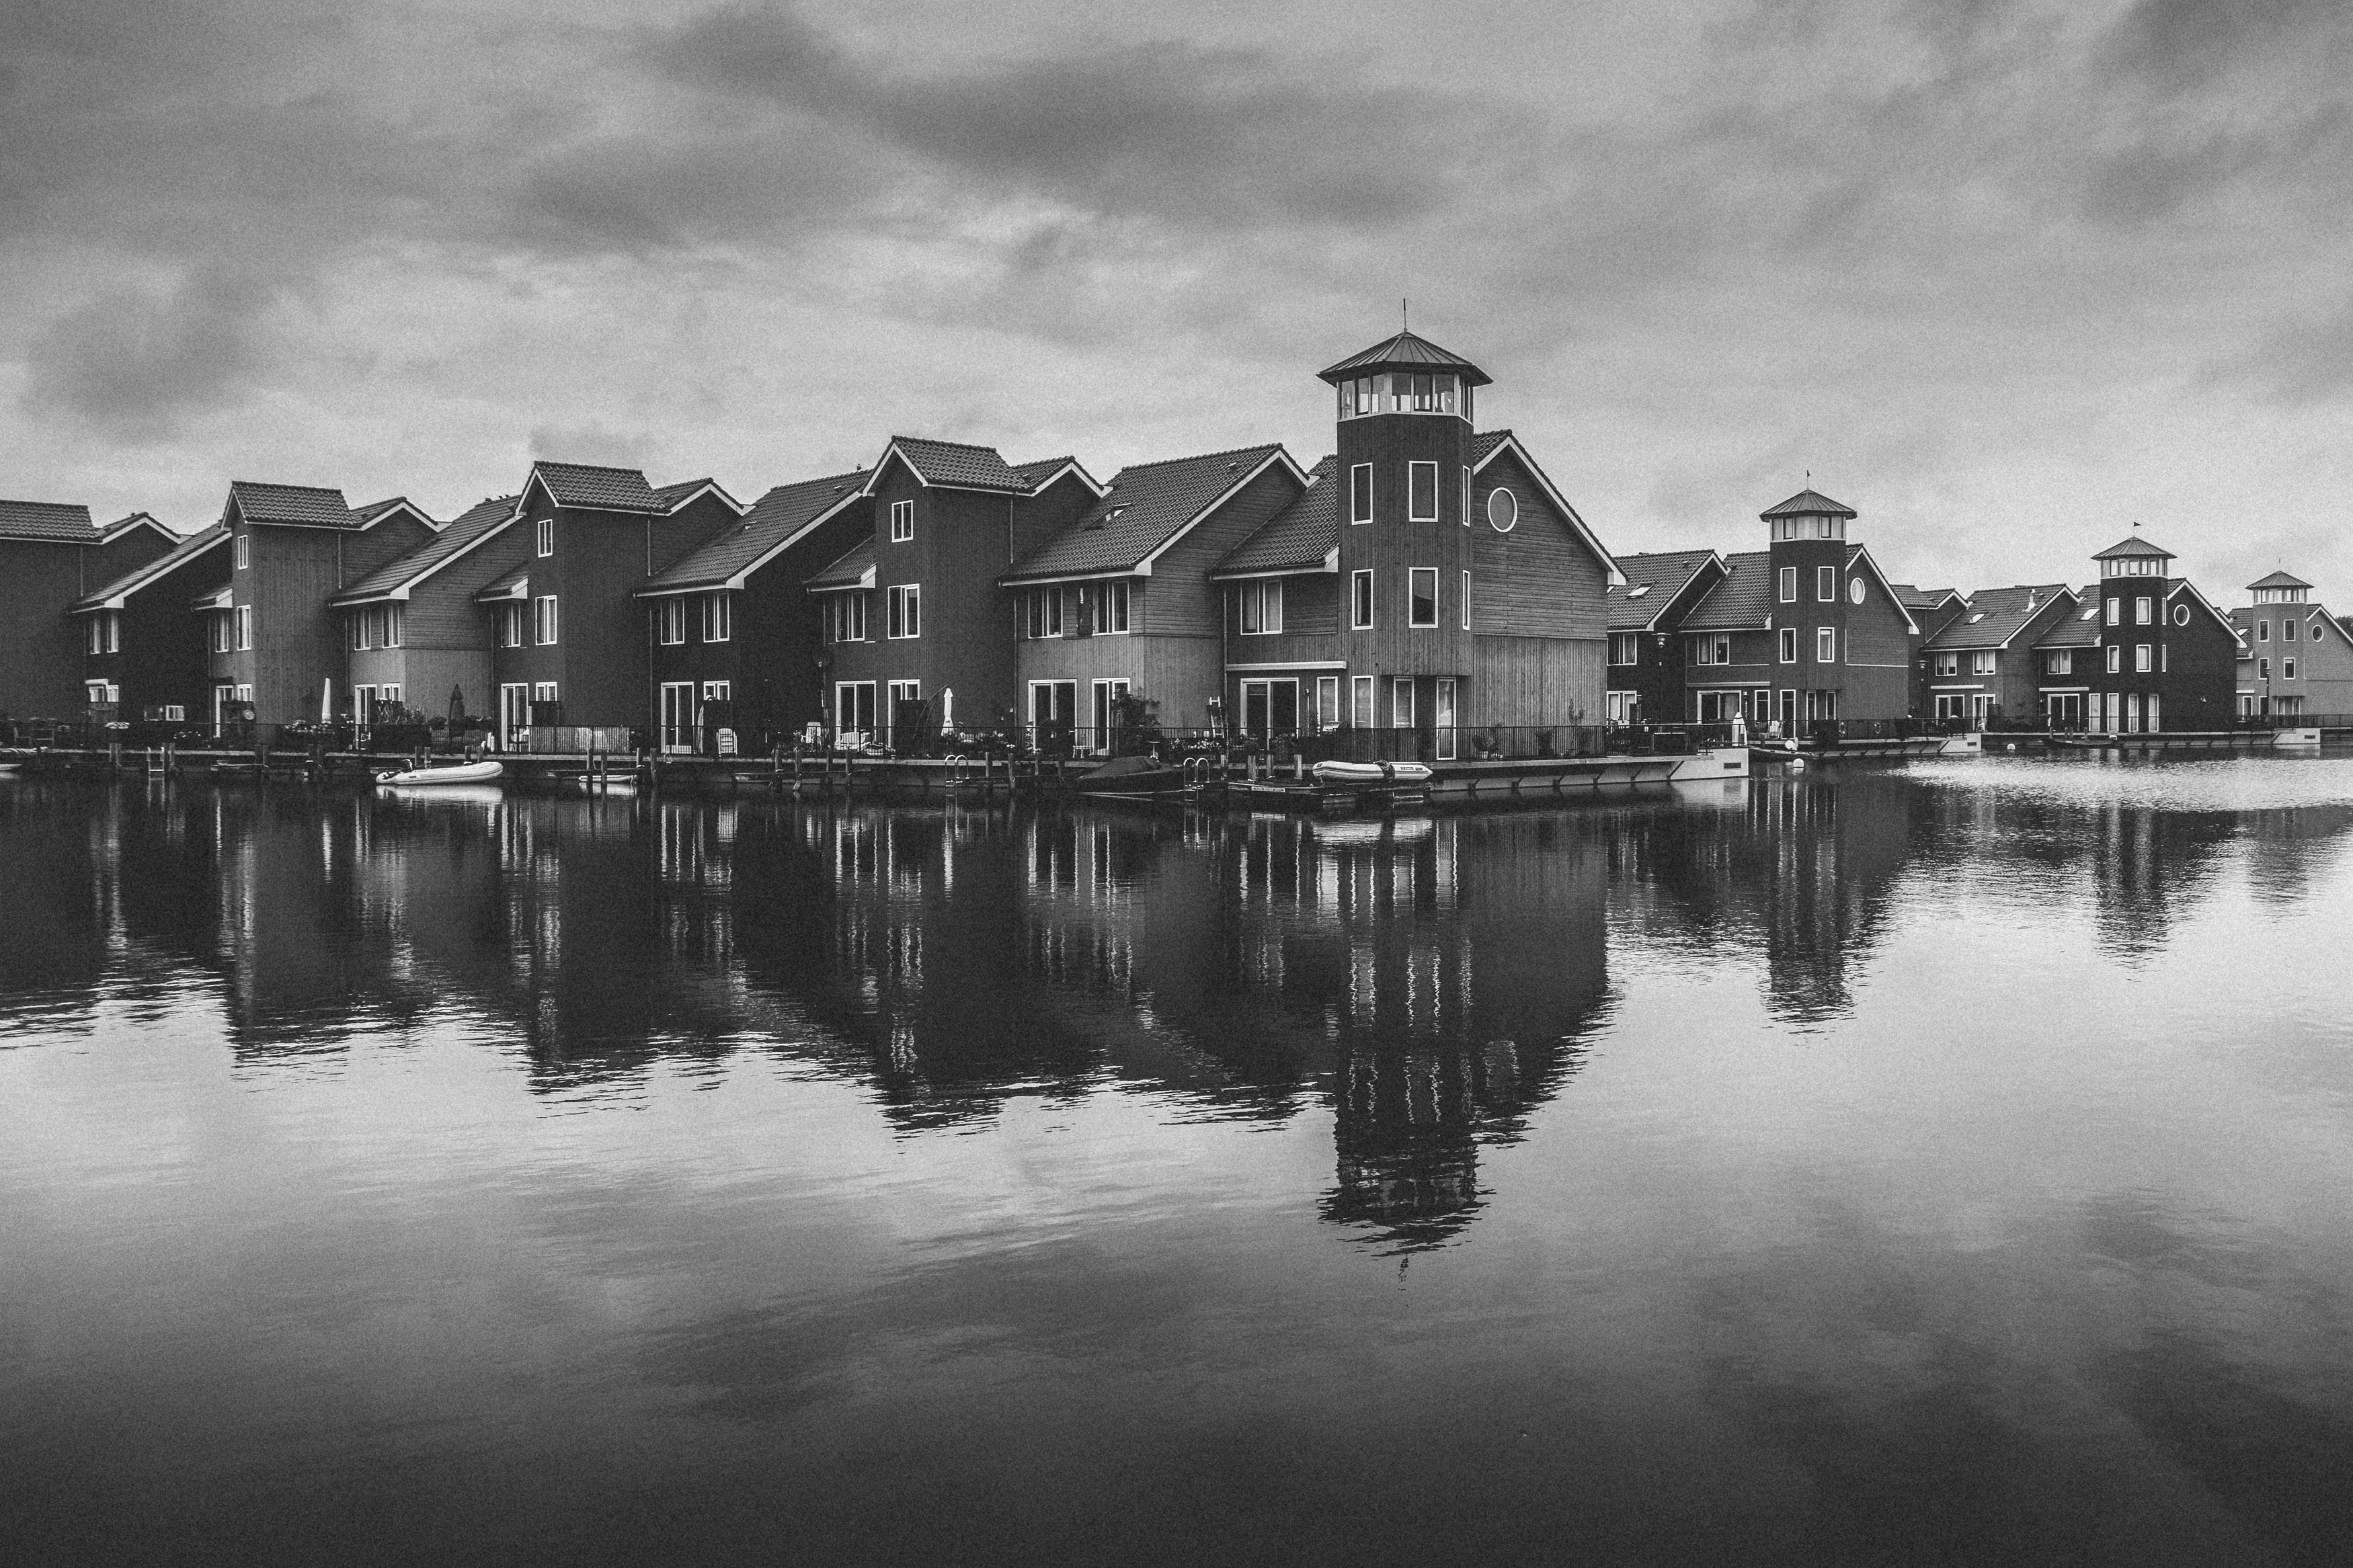 Black and white photo of townhouses on the waterfront, under a cloudy sky